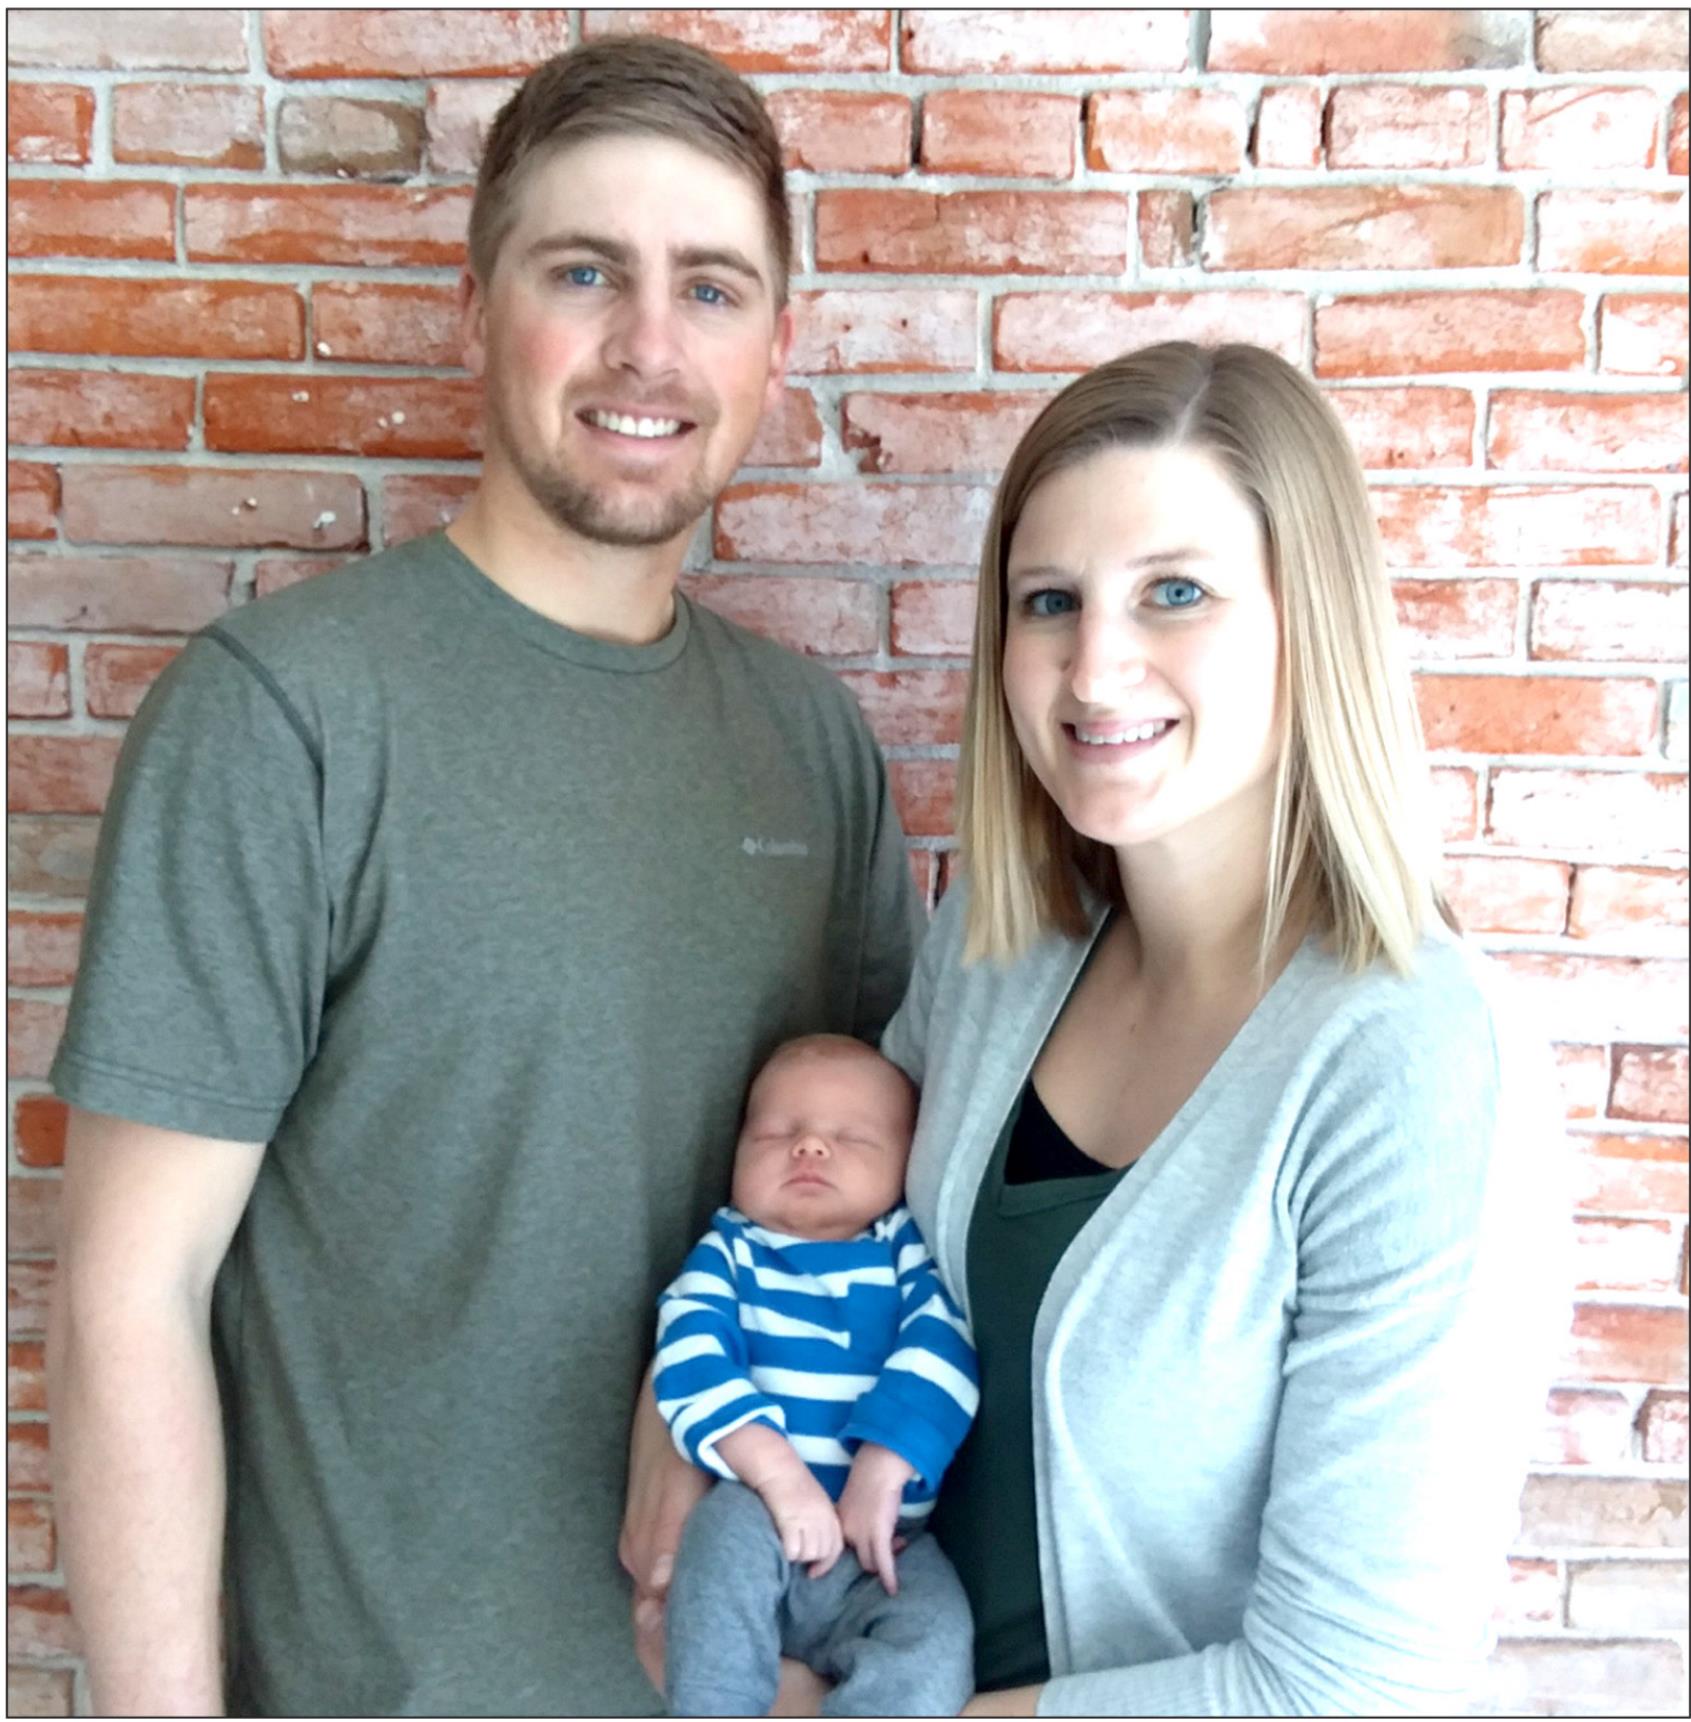 THIS YEAR’S 2020 Stockton Sentinel New Year’s Baby is Ezra Michael Kriley. Ezra made his appearance on Friday, February 21st. Ezra is the son of Dustin and Dayna Kriley of Stockton. Their hope is that he has the love of the outdoors.